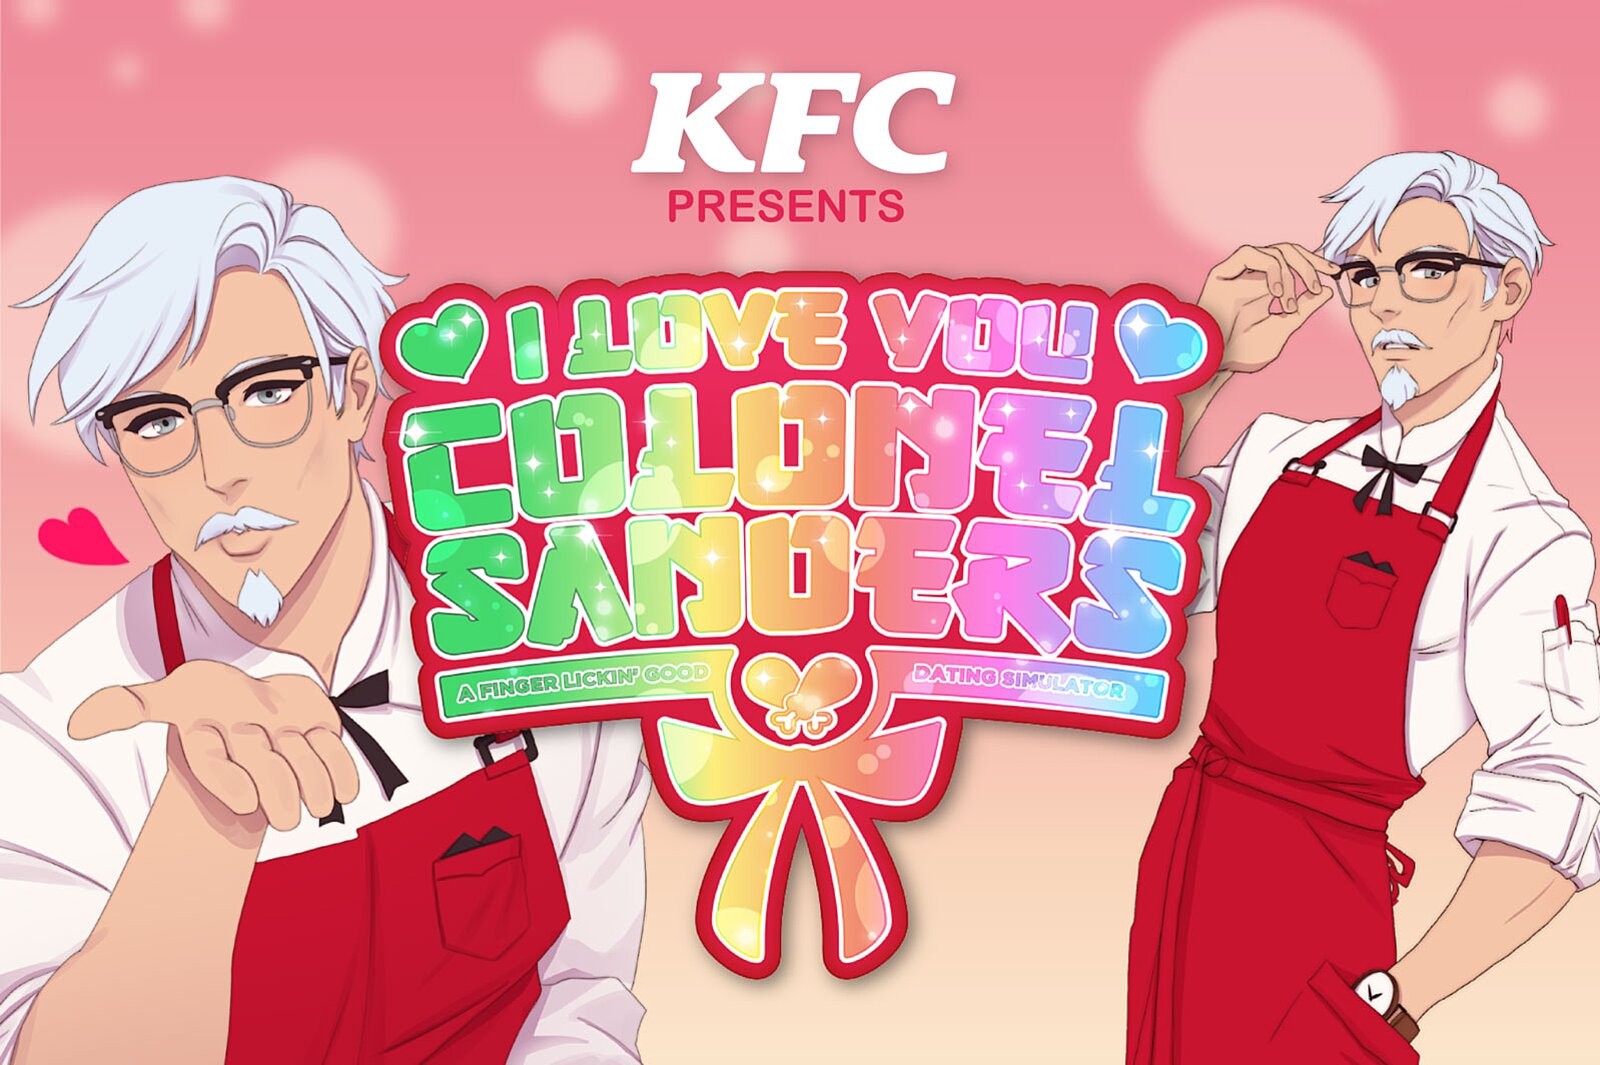 love you colonel sanders - Kfc Presents Qi Love You Chin Snders Dating Simulator Afinger Lickin' Cood